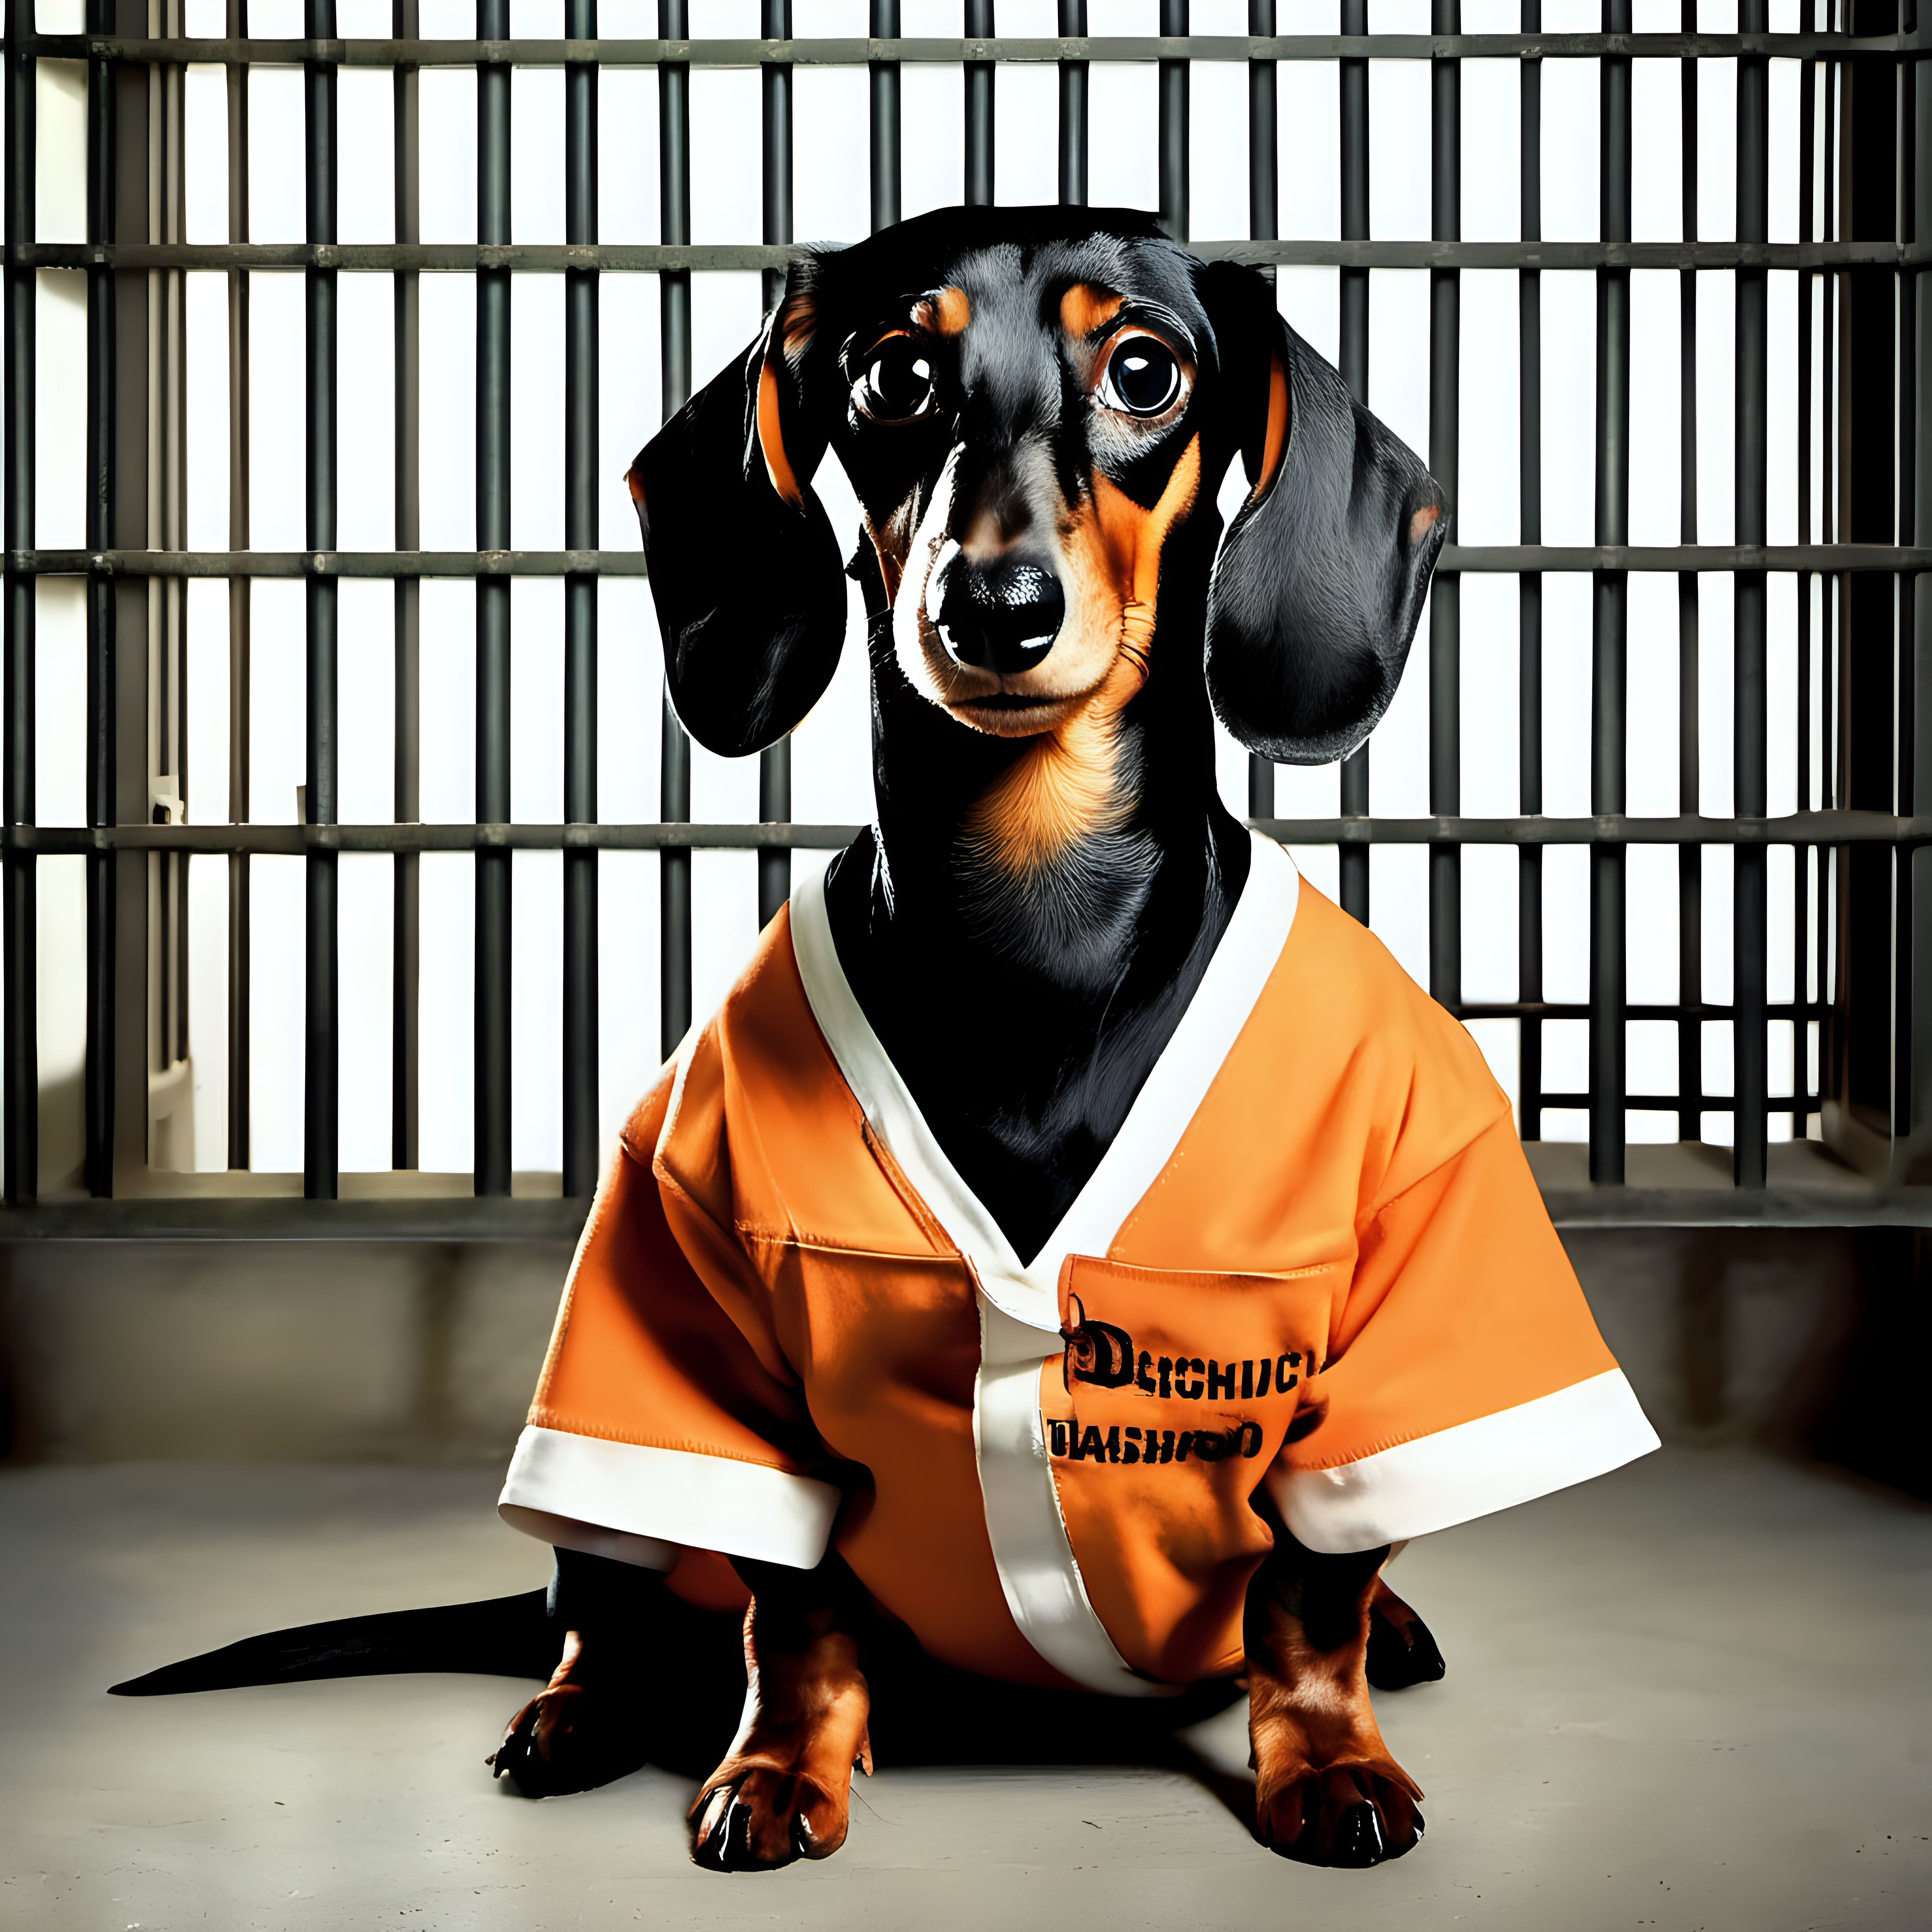 a black and tan Dachshund in prison garb in a prison cell looking sad
